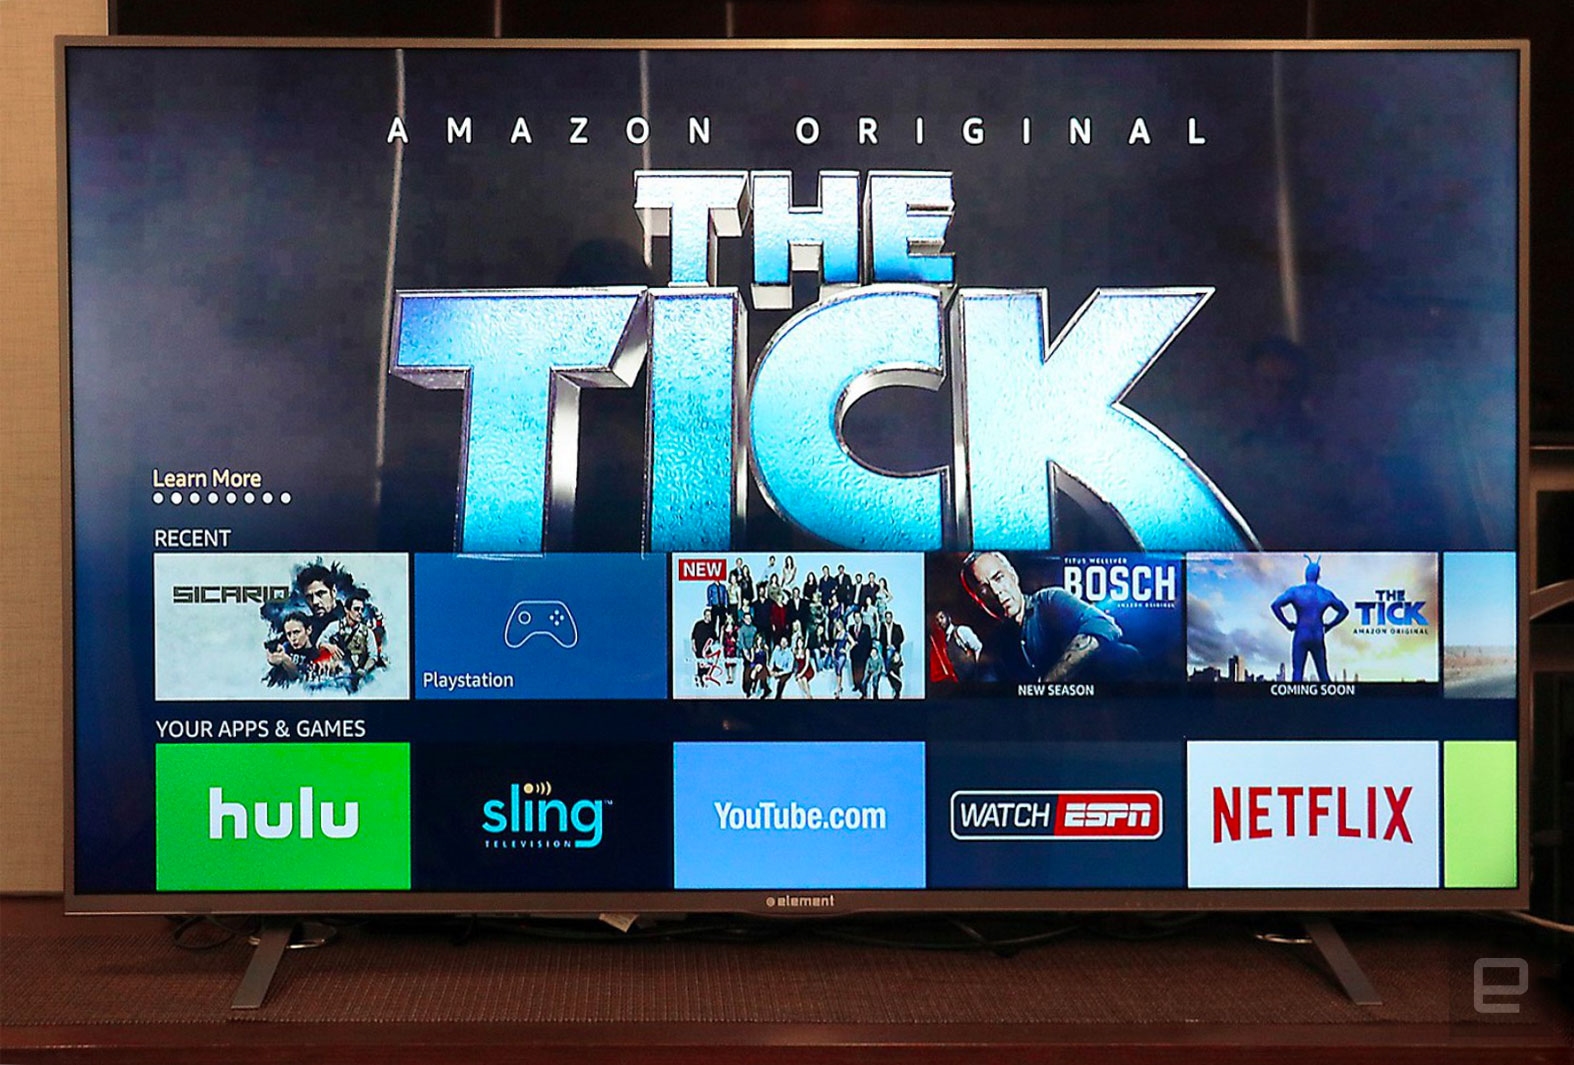 Amazon could take on UK broadcasters with a smart TV launch | DeviceDaily.com